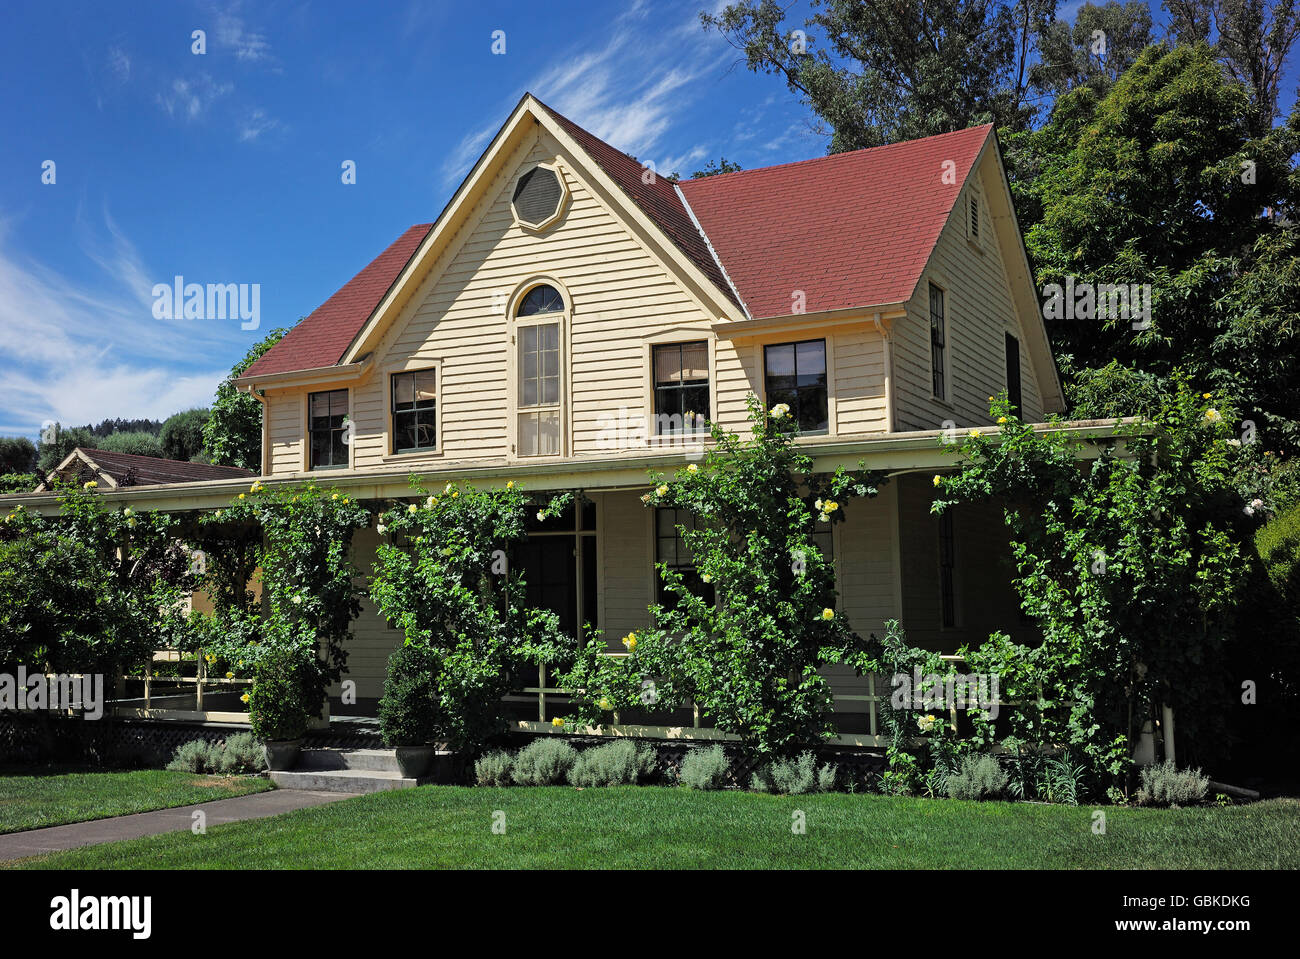 The Chiles House - One of the Oldest Homes in the Napa Valley,  at the Inglenook Winery un Rutherford near Napa California Stock Photo